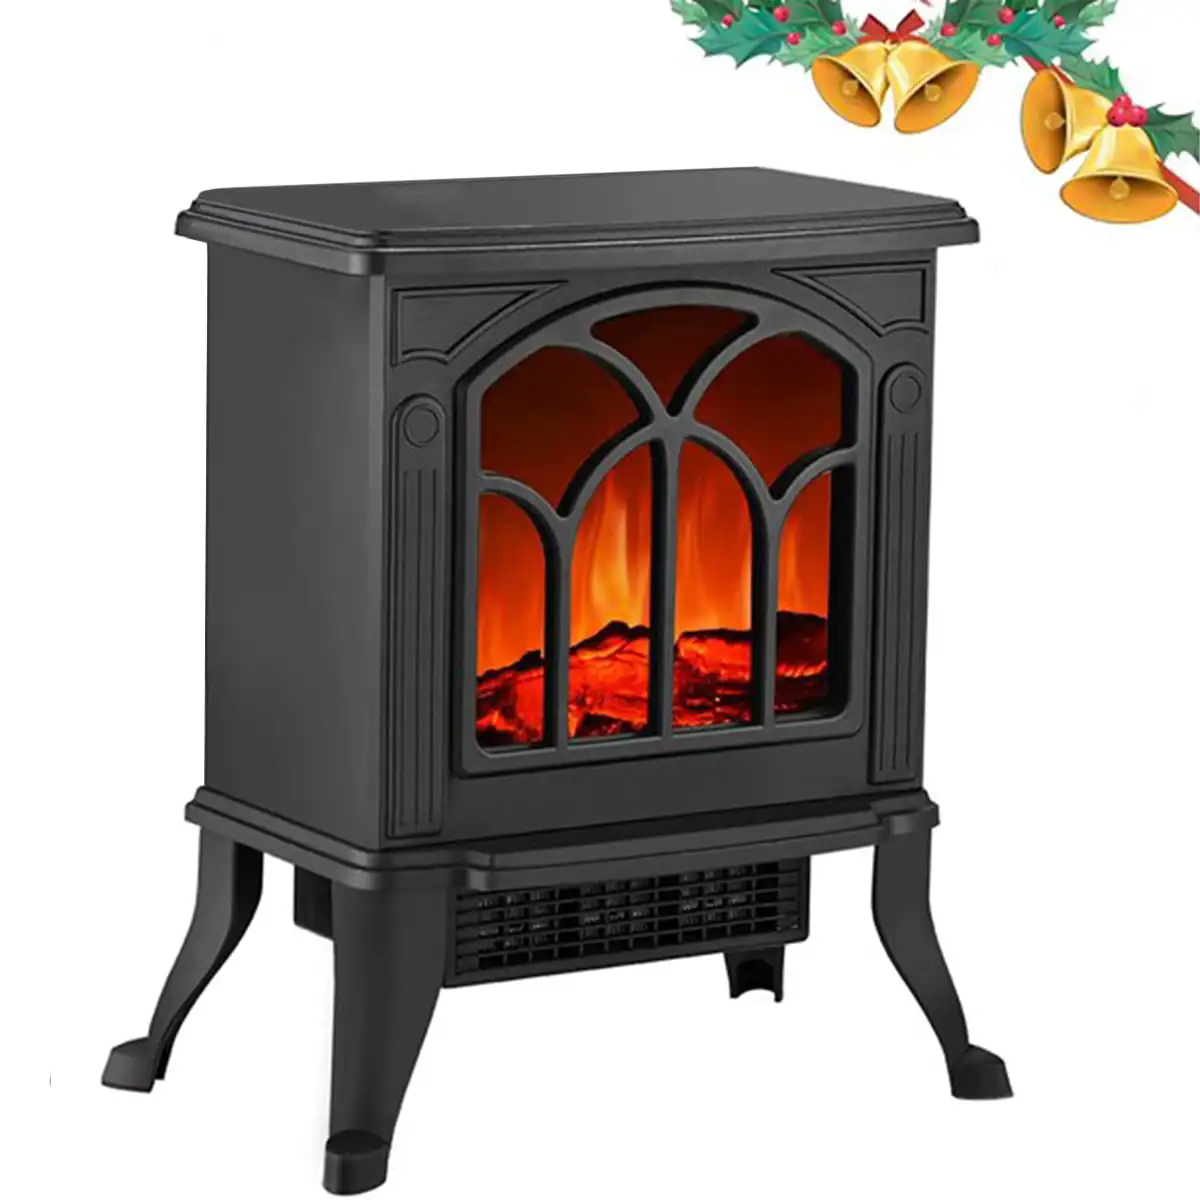 electric fireplace Fireplace Heater Freestanding Fireplace Infrared Space Heater, Black with fire flame